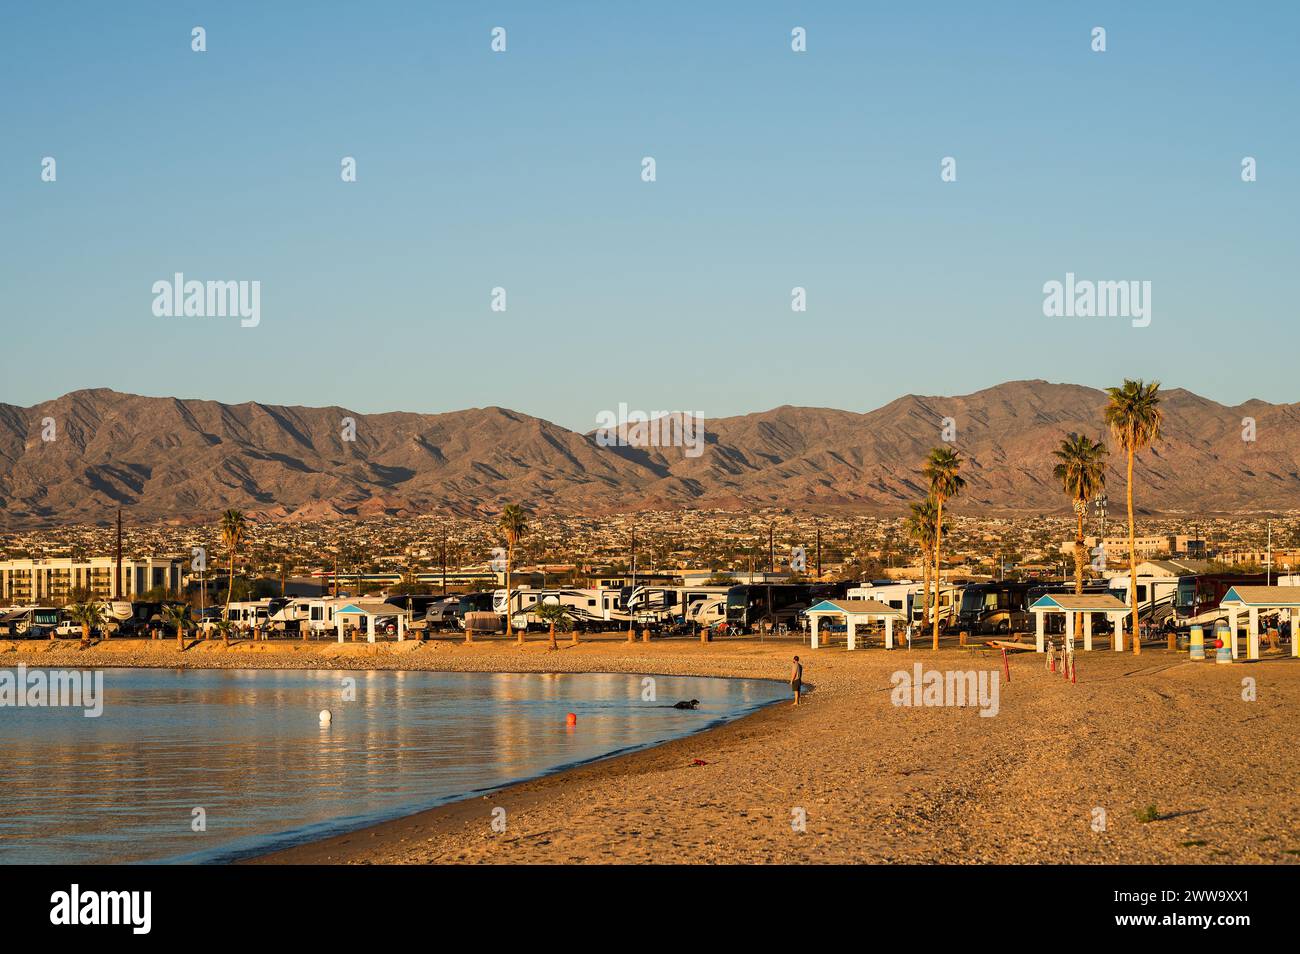 RV’s Motor Homes, and trailers parked at a campground on the shore of Lake Havasu Arizona, USA. Stock Photo